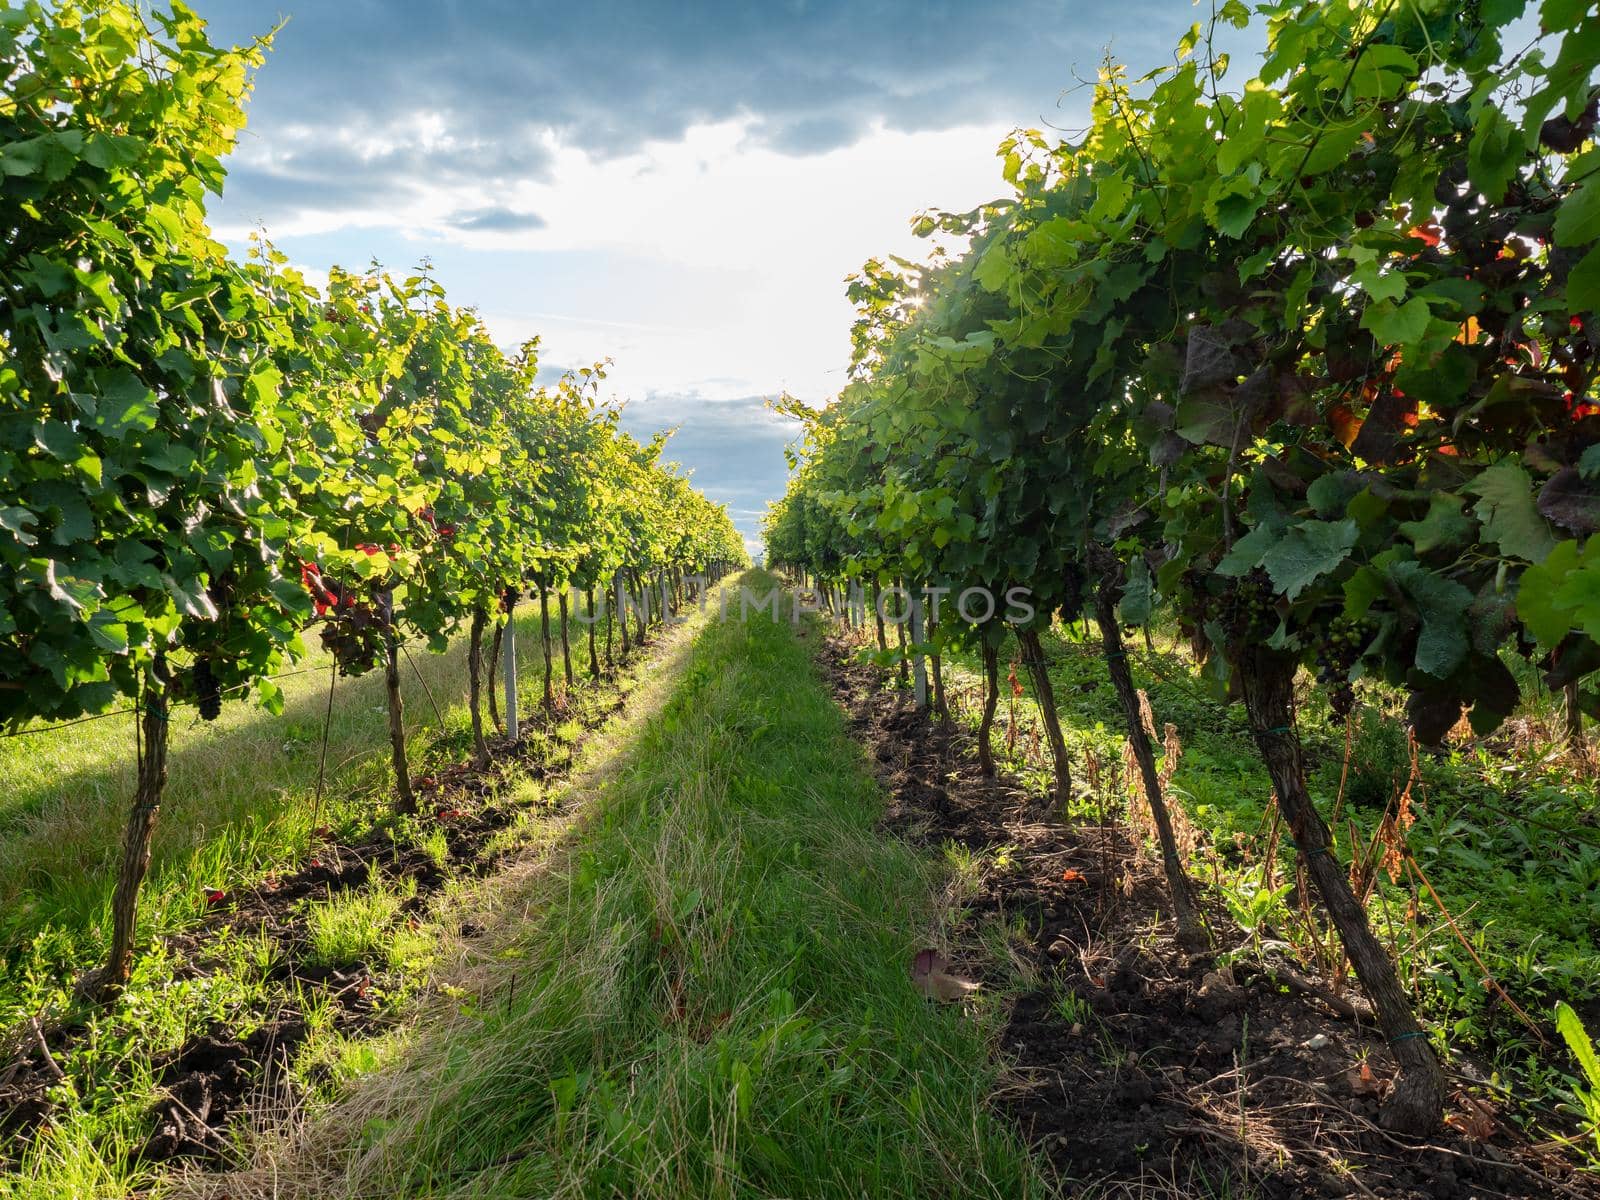 Between vineyard rows in summer sunny evening. Ritch healthy plants with big juicy vine grapes bunches.